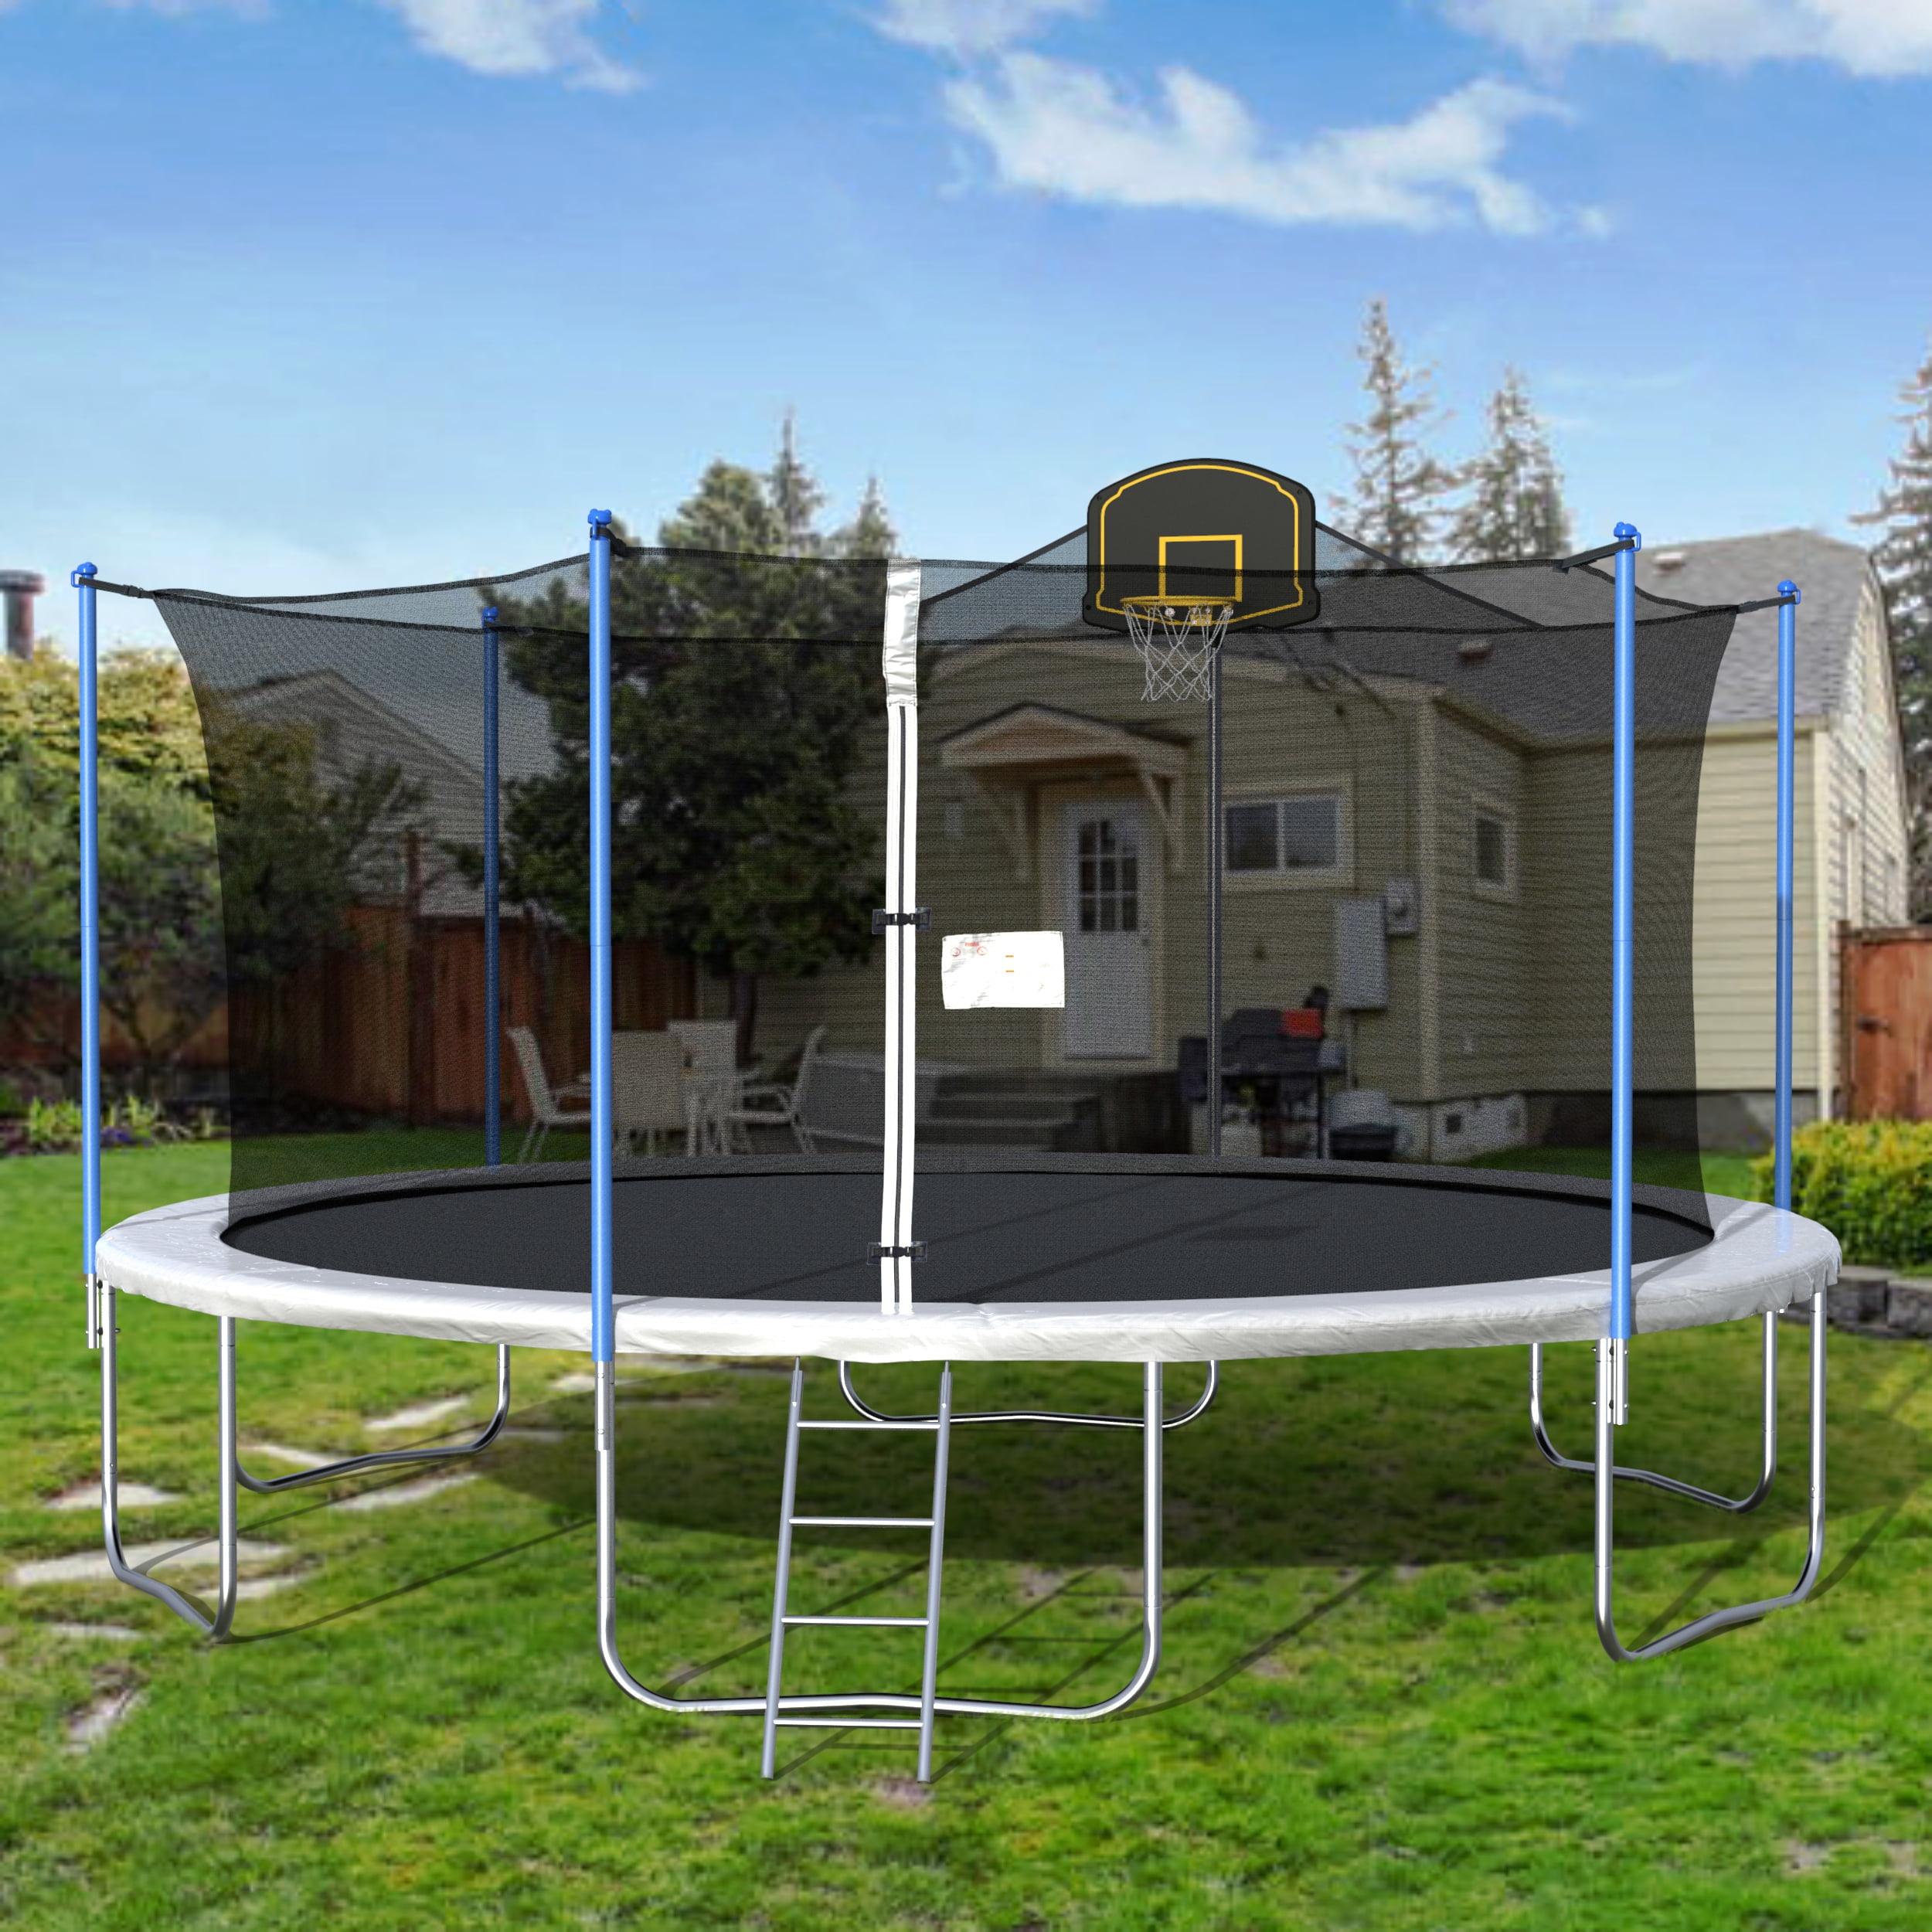 Outdoor Trampoline, 16 FT Kids Trampoline with Enclosure, Basketball